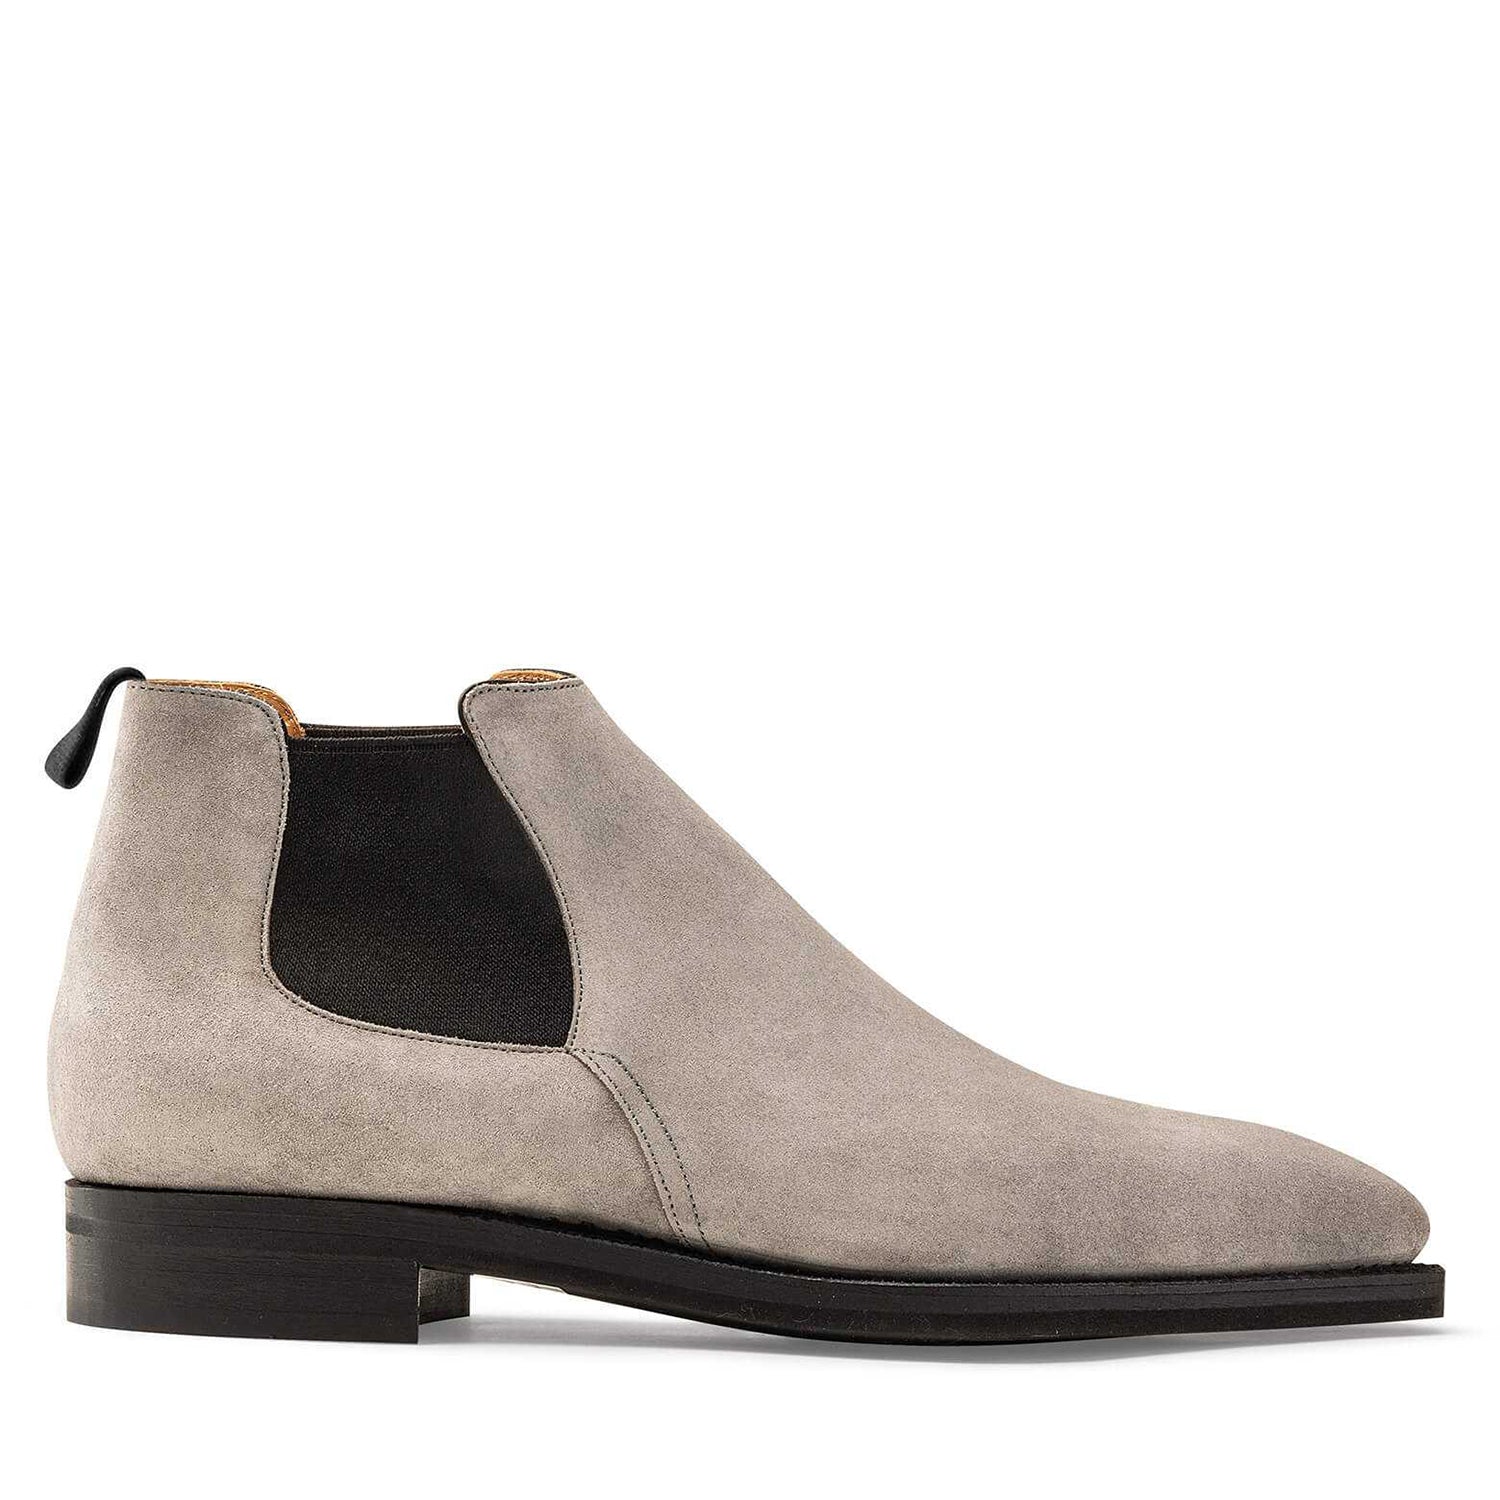 GREY BOOTS SUEDE CALF LEATHER